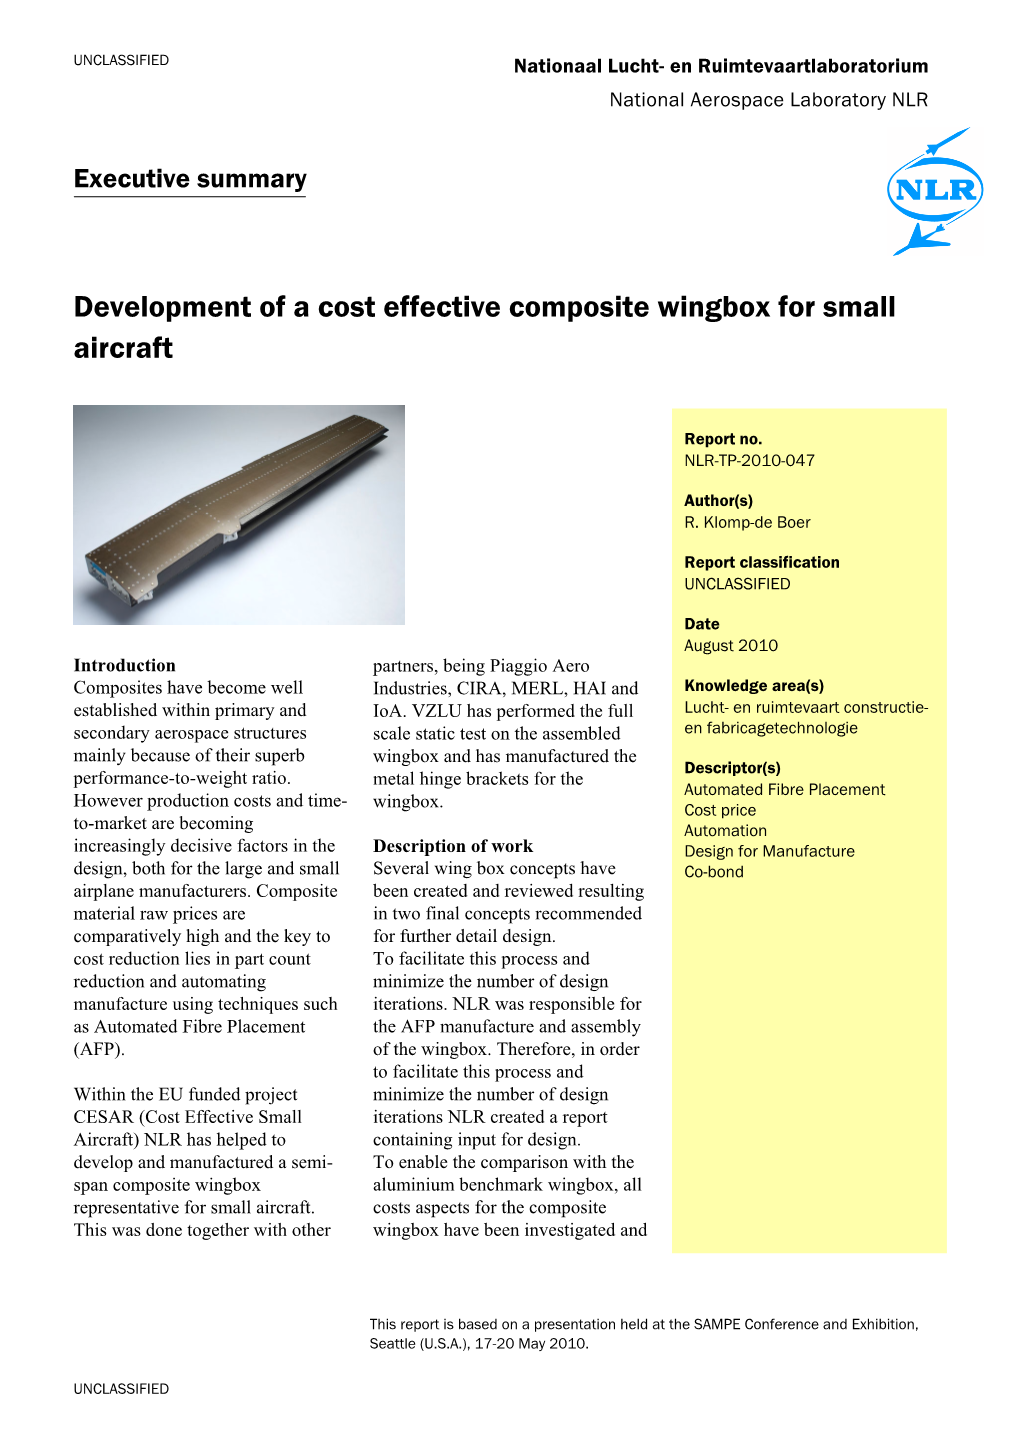 Development of a Cost Effective Composite Wingbox for Small Aircraft